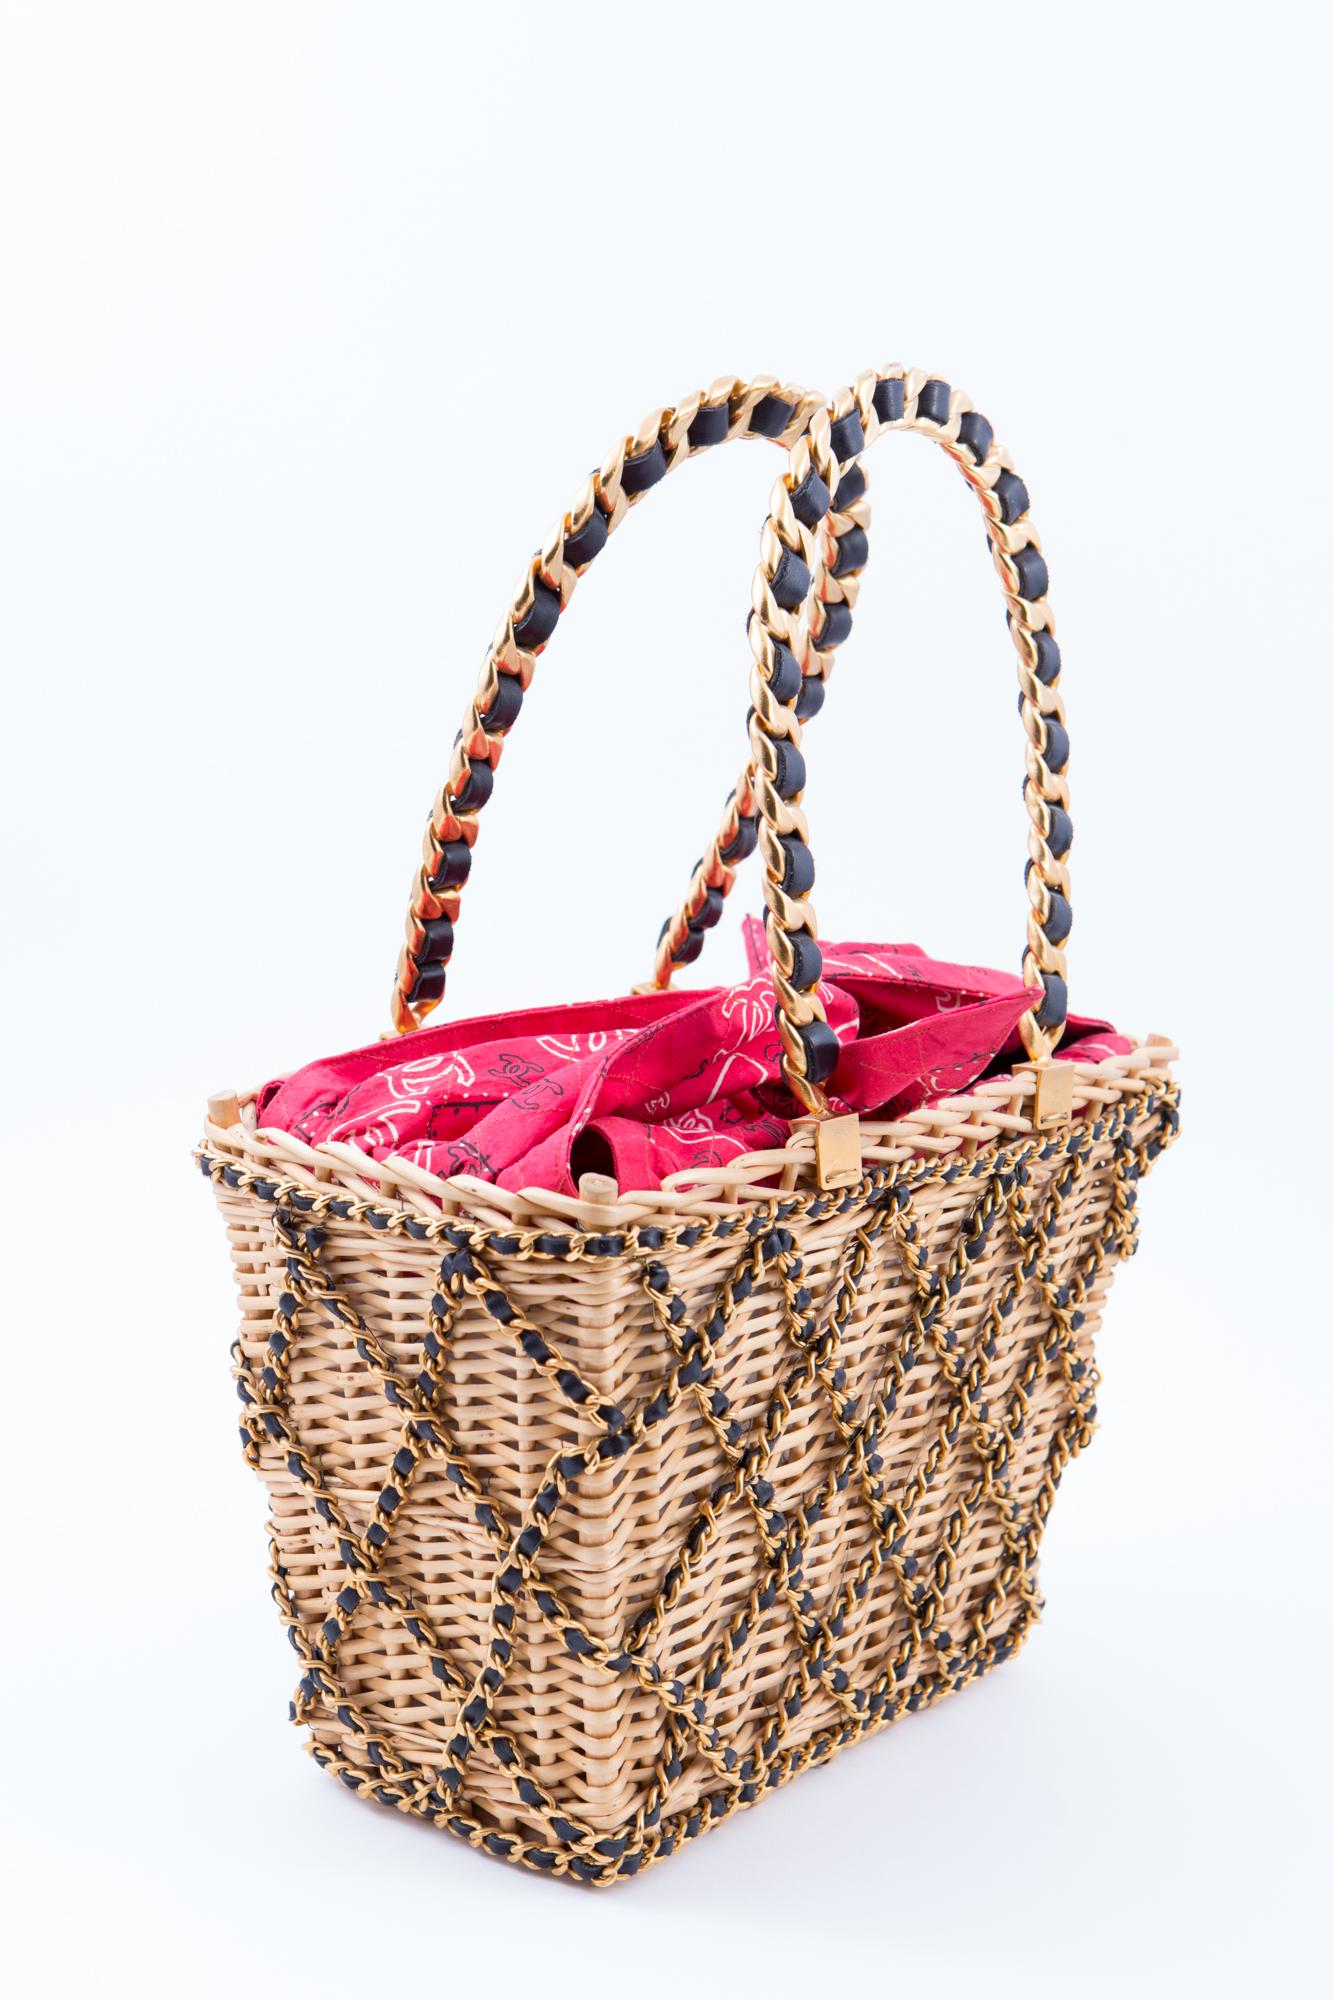 1994s Chanel collector wicker basket bag featuring chain embellished, a red bandana scarf lining cotton detail.
See attached 1994s catwalk images.
Osier Willow 100%, Straw 100%, Leather 100%
Made in France.
In good vintage condition. 
Length: